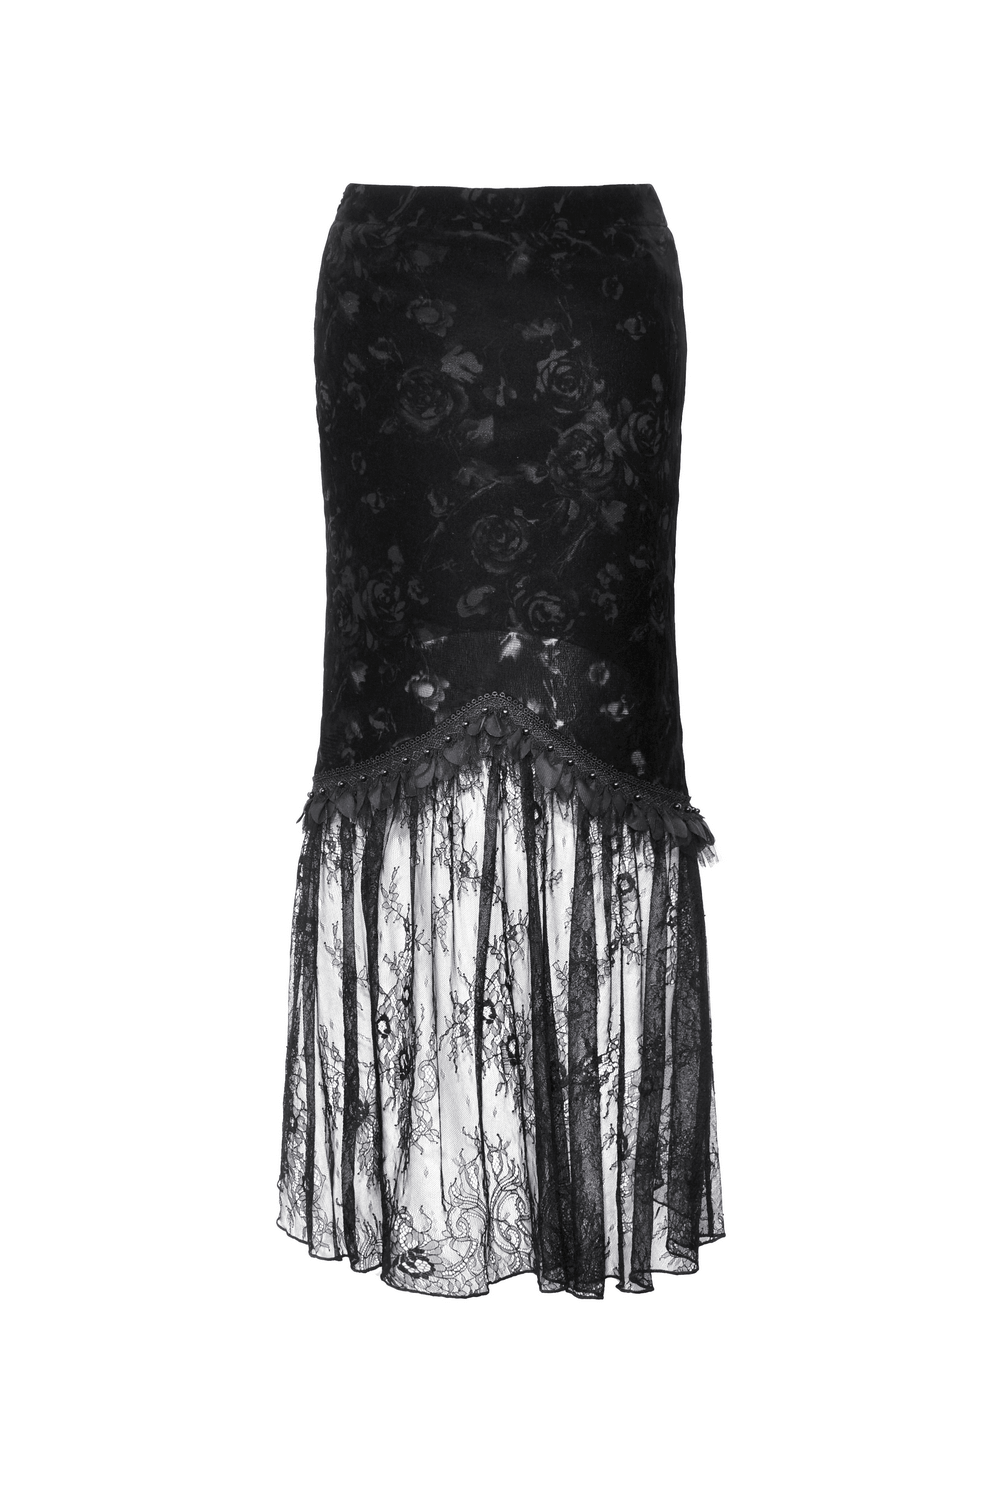 Chic Black High-Low Long Skirt with Lace Detail